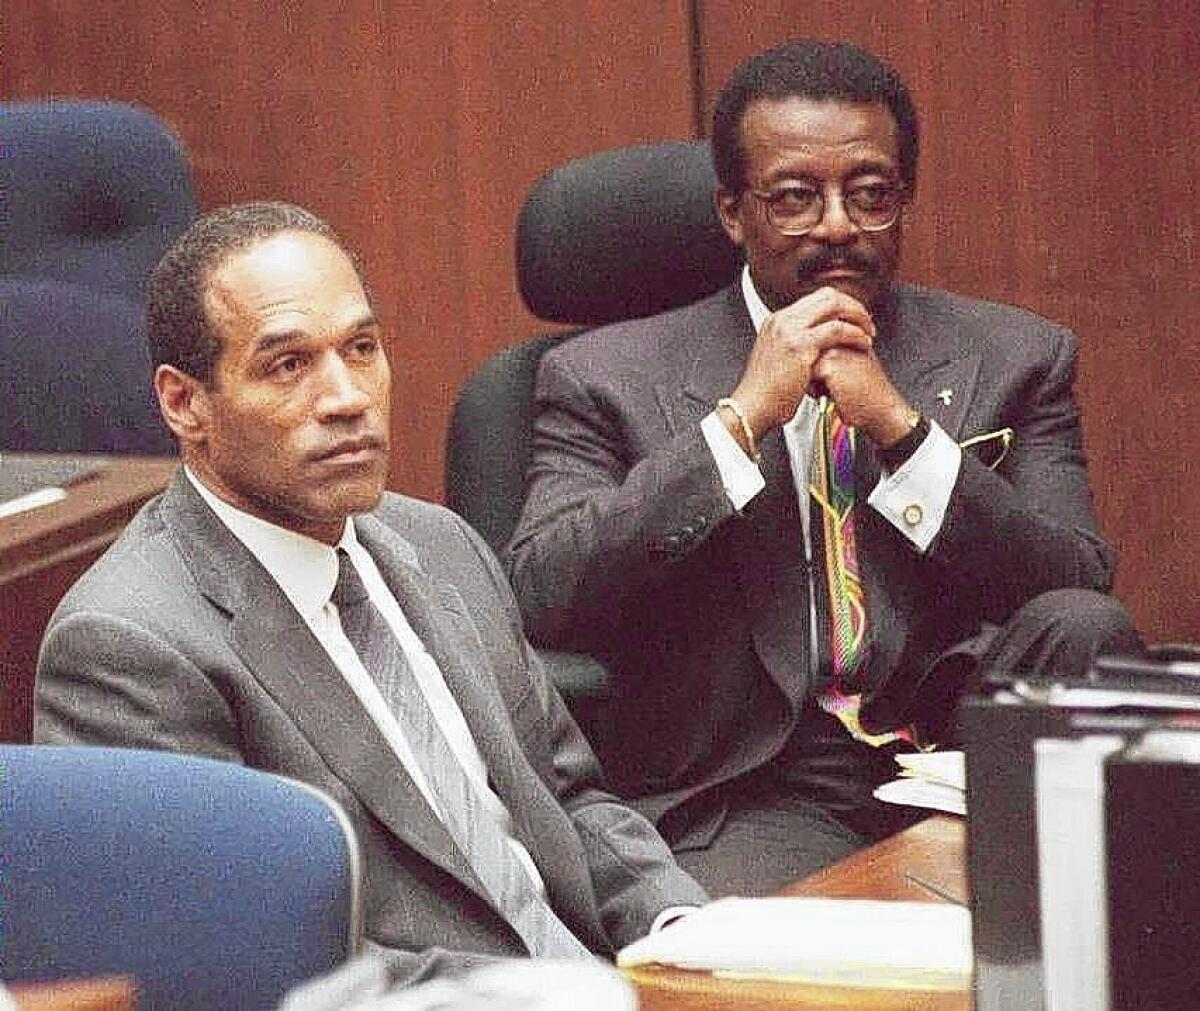 O.J. Simpson, left, and his attorney Johnnie Cochran Jr. during the trial.